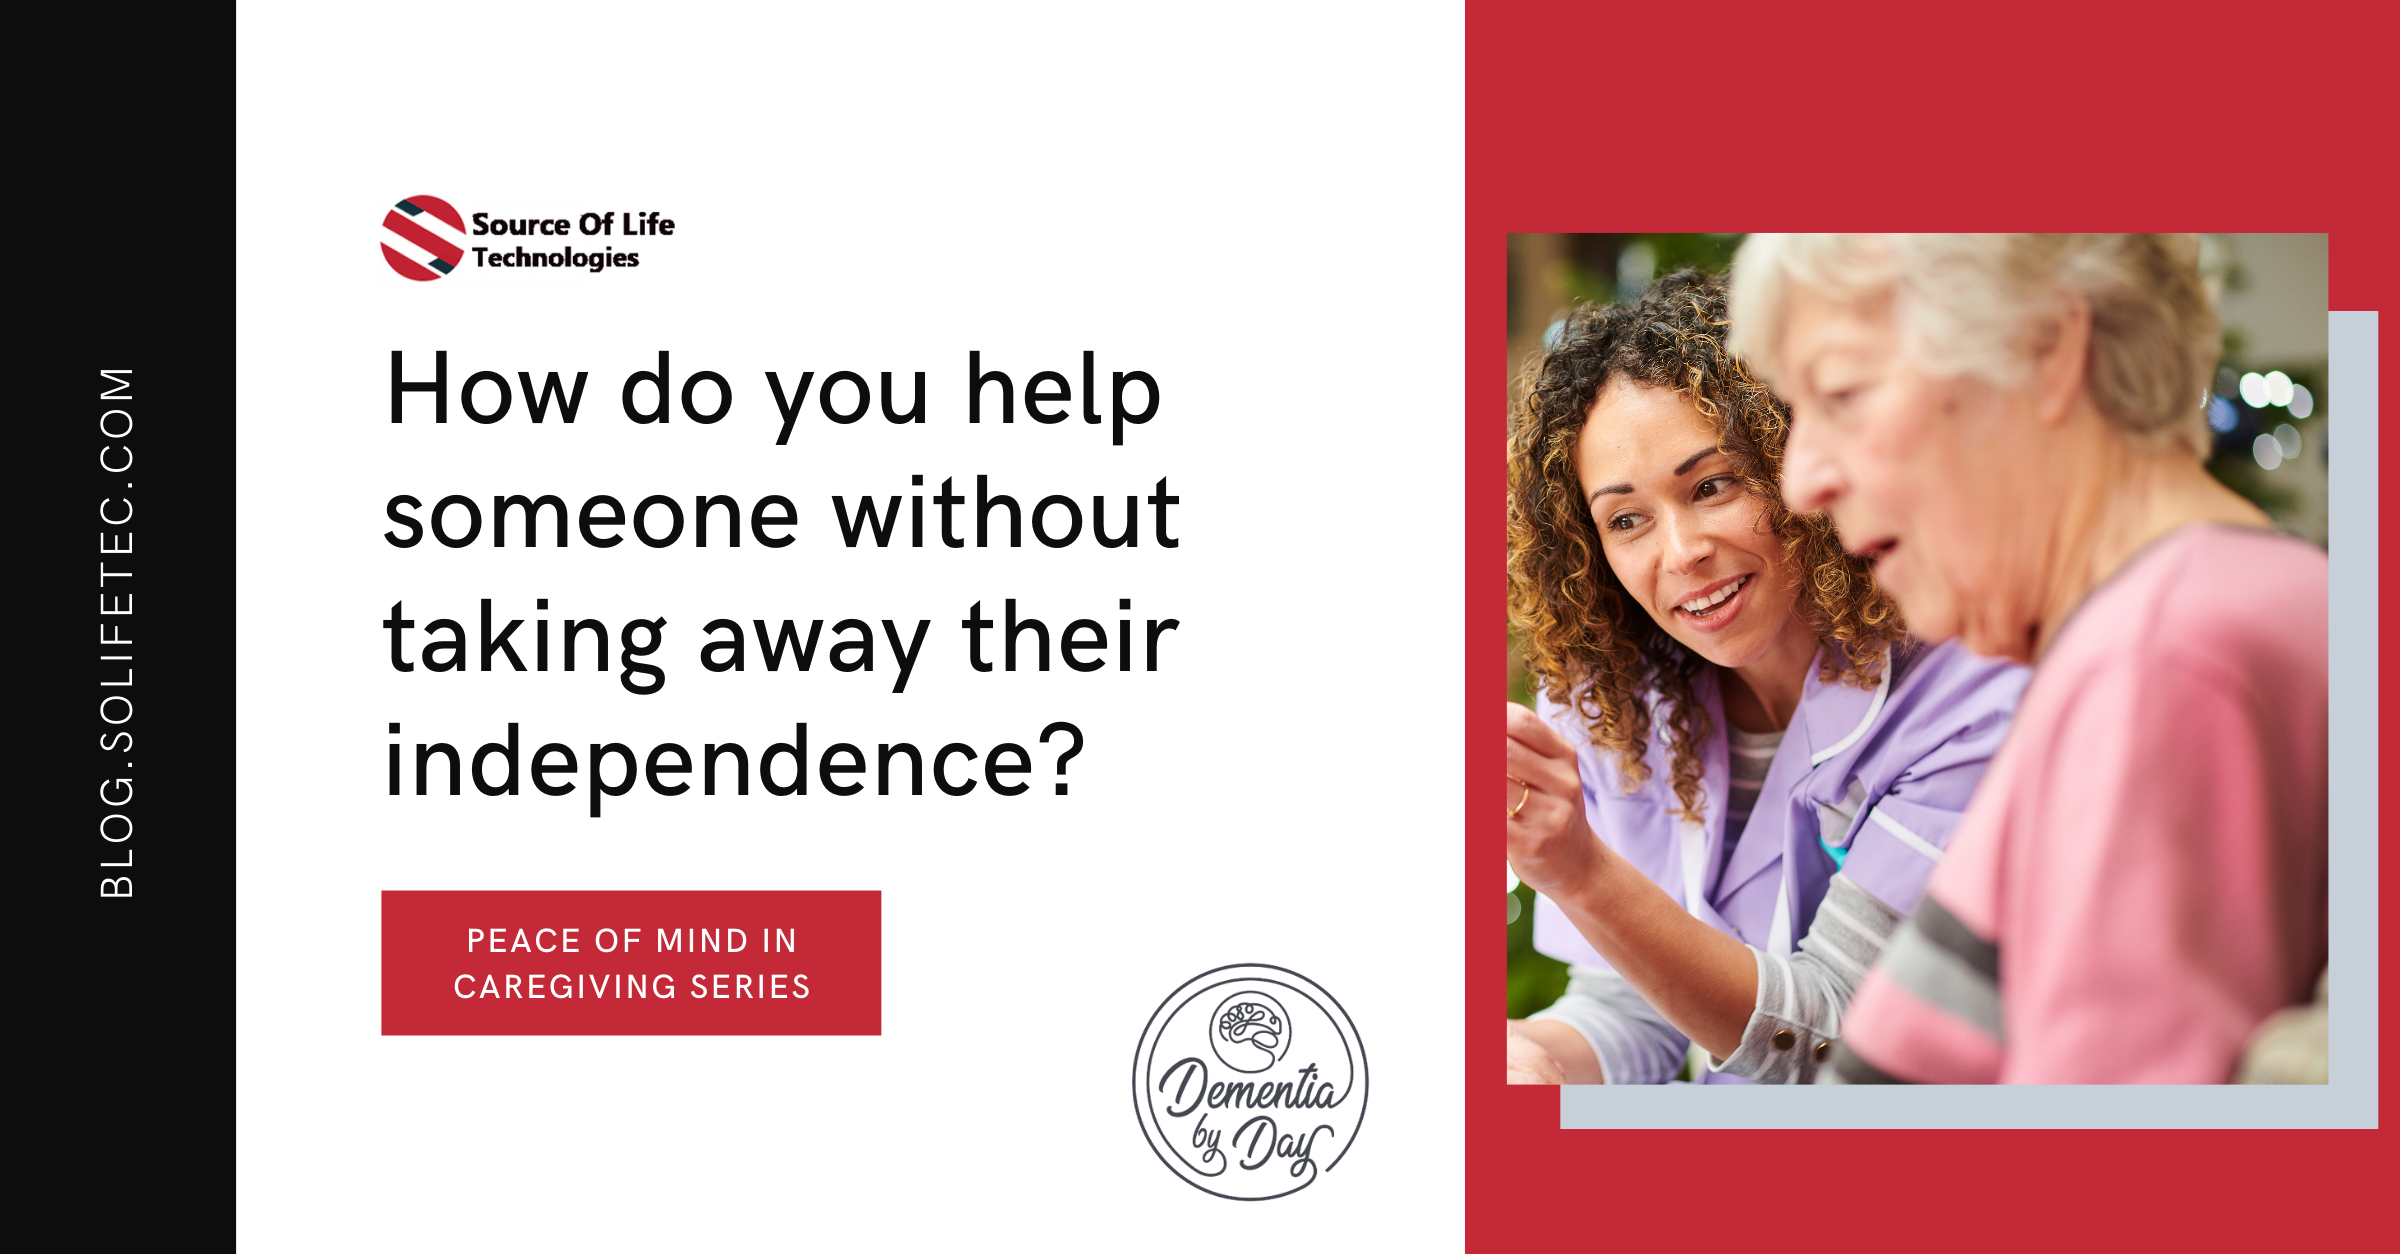 How do you help someone without taking away their independence?